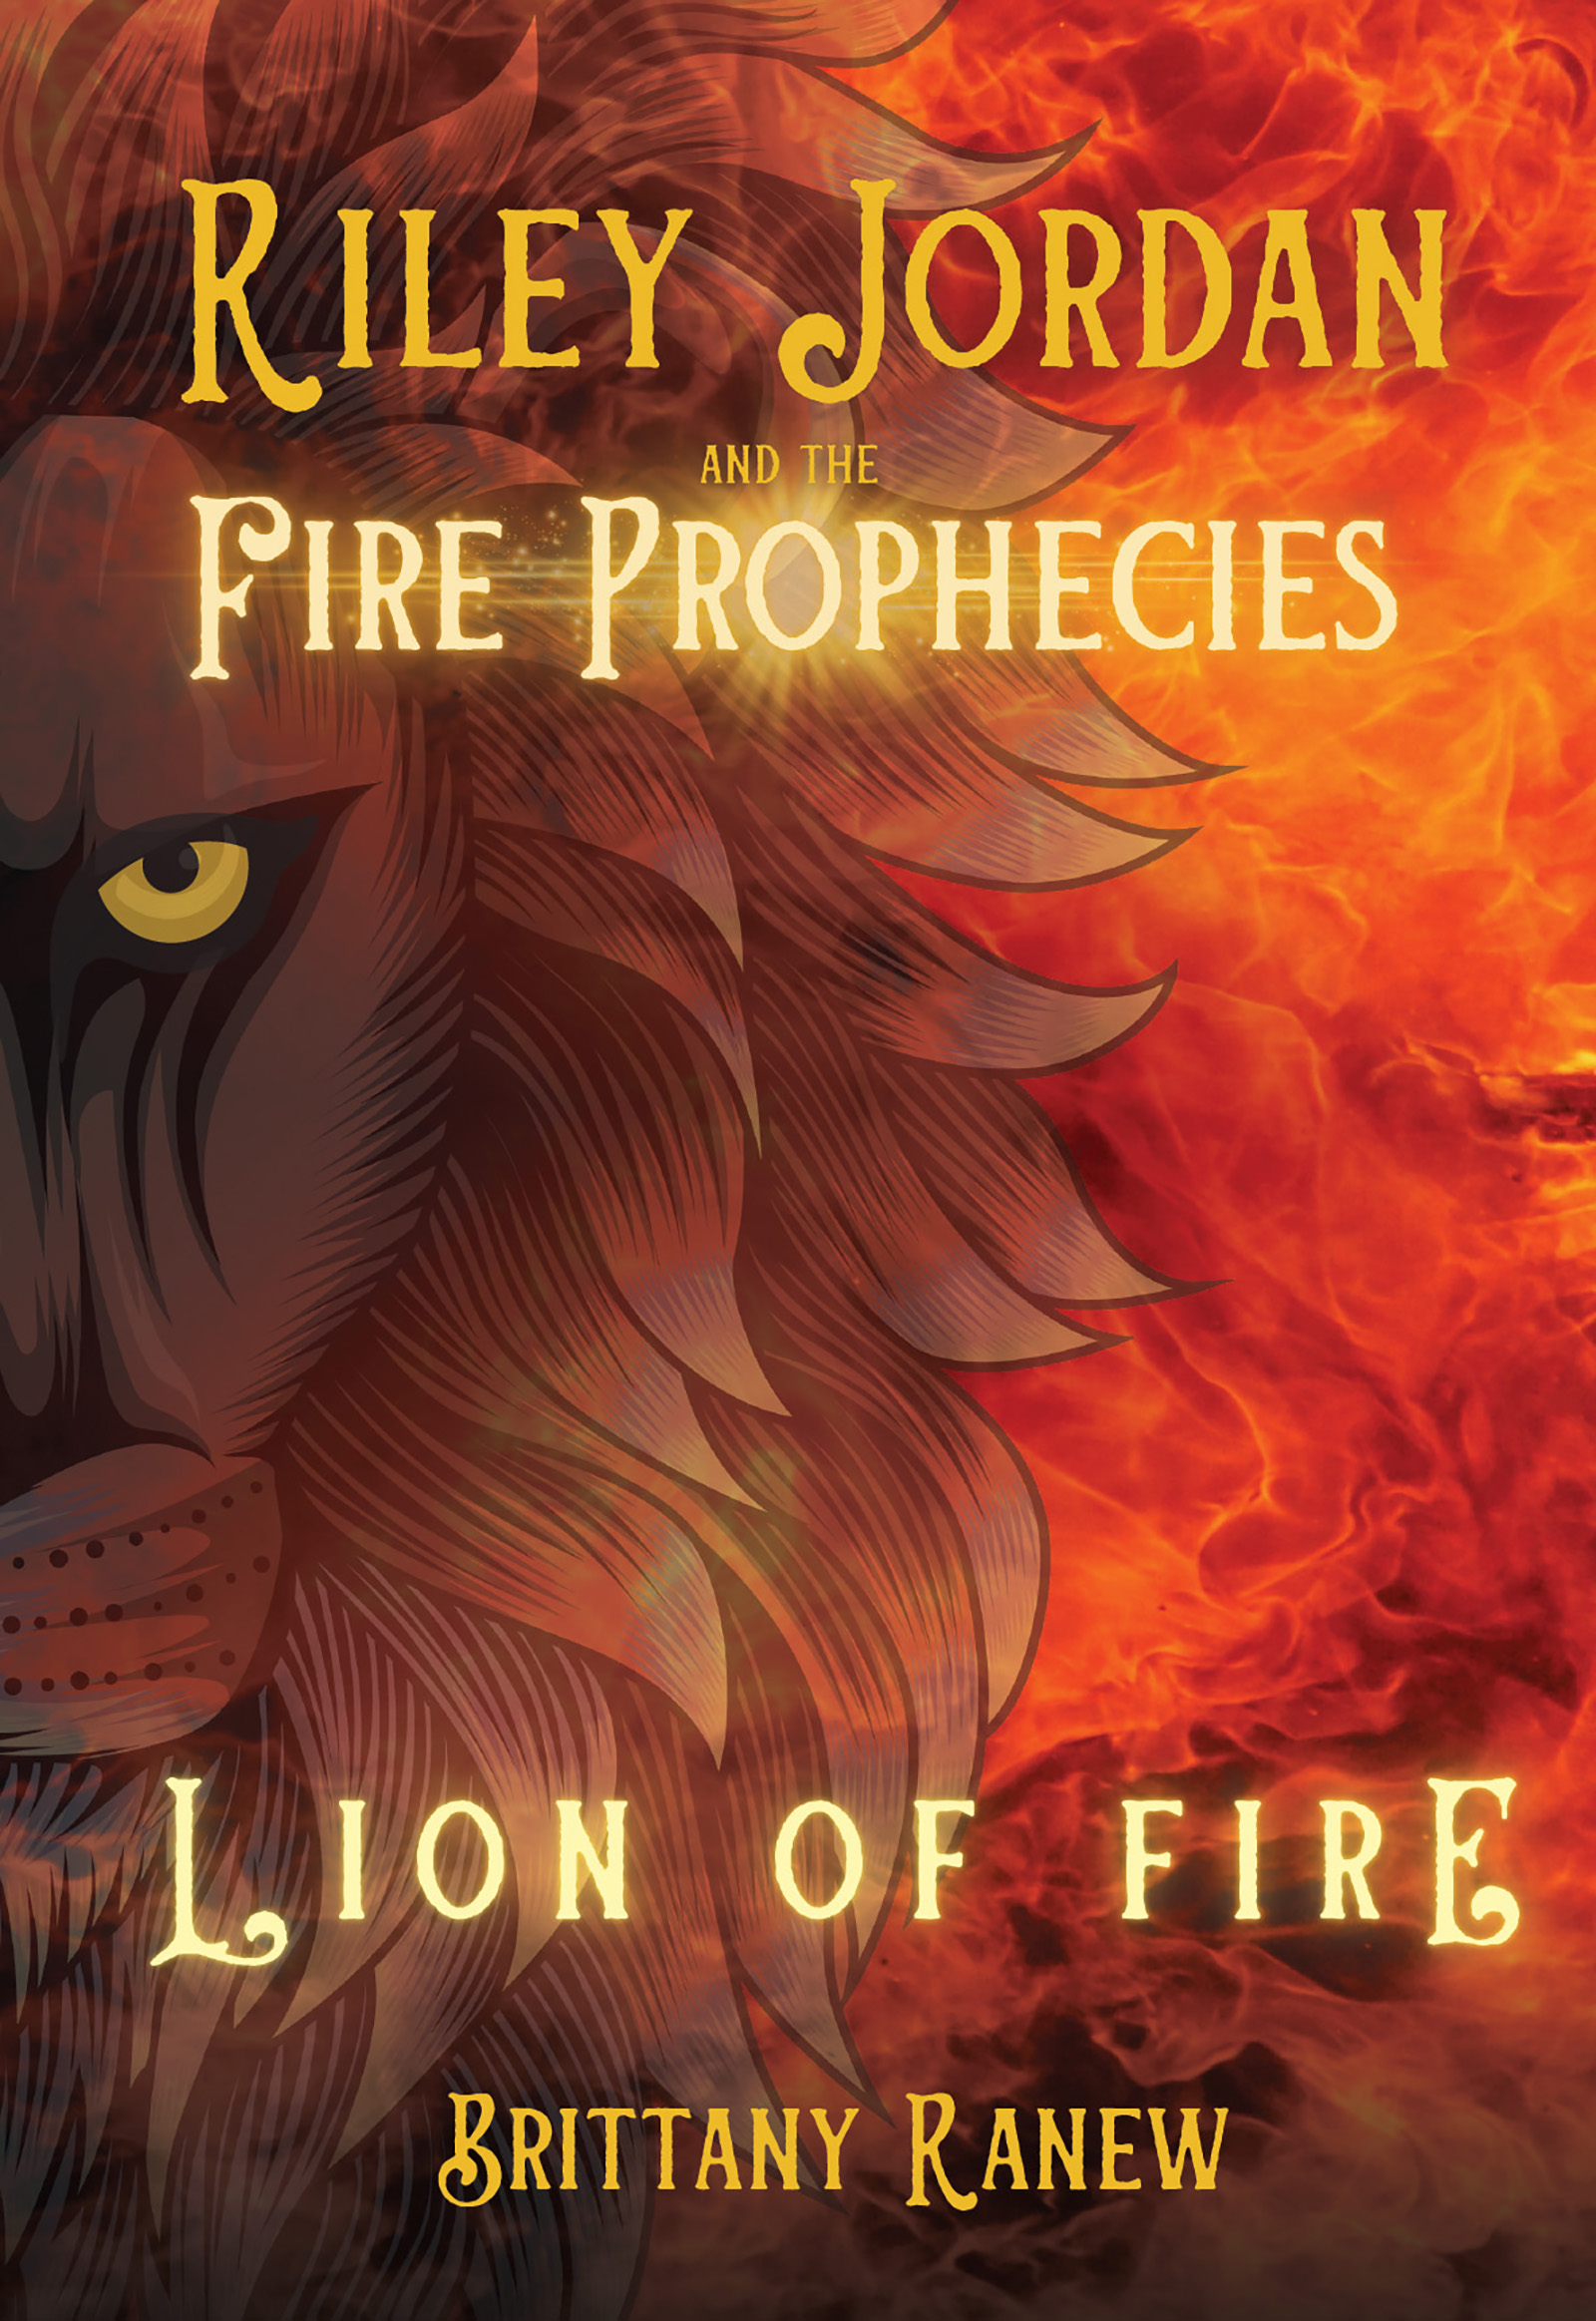 Lion of Fire